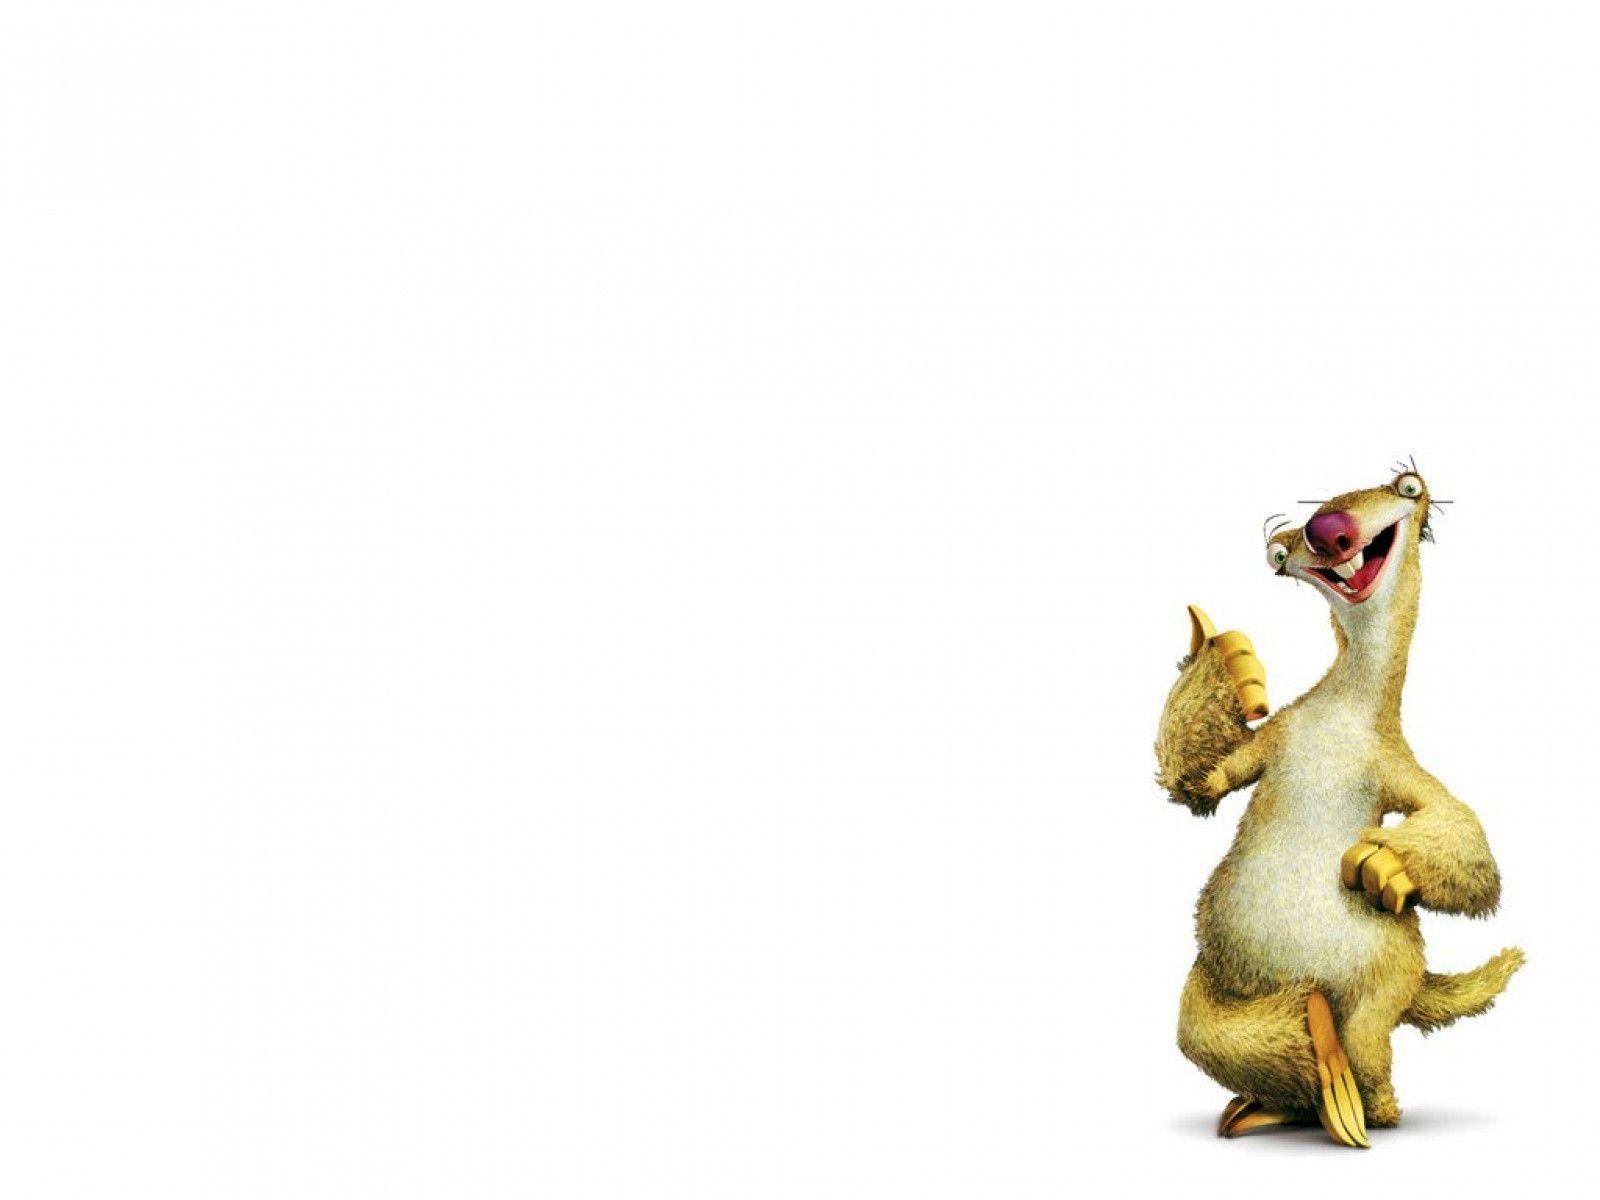 Ice Age Sid Wallpaper download latest Ice Age Sid Wallpaper